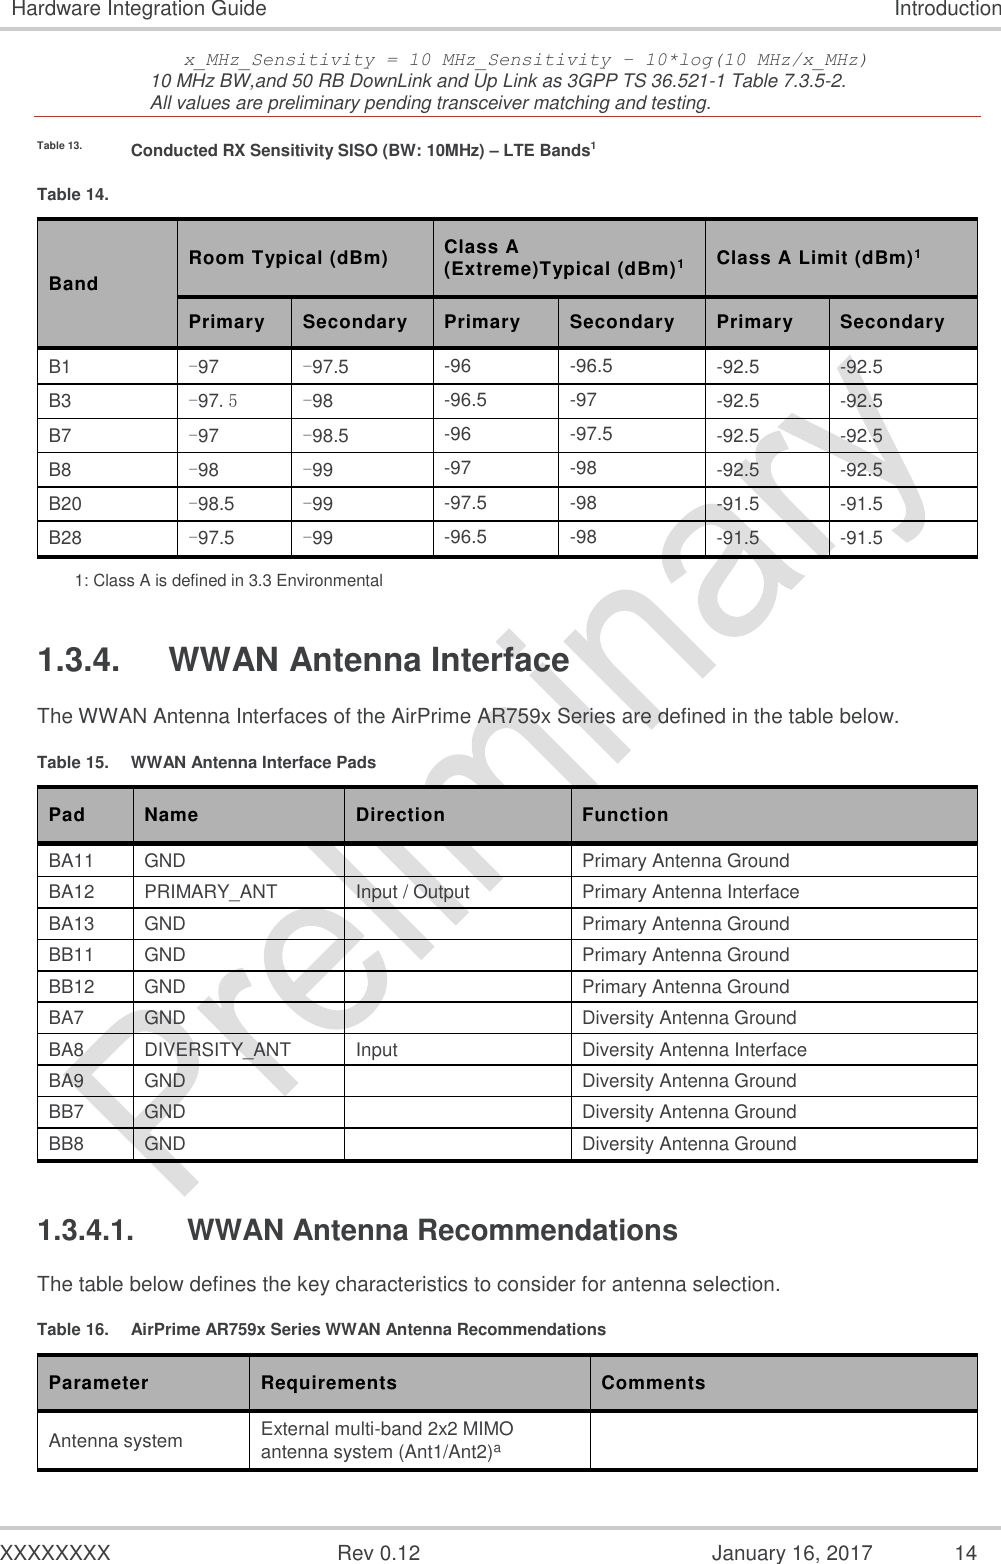  XXXXXXXX  Rev 0.12  January 16, 2017 14 Hardware Integration Guide Introduction    x_MHz_Sensitivity = 10 MHz_Sensitivity – 10*log(10 MHz/x_MHz) 10 MHz BW,and 50 RB DownLink and Up Link as 3GPP TS 36.521-1 Table 7.3.5-2. All values are preliminary pending transceiver matching and testing. Table 13.  Conducted RX Sensitivity SISO (BW: 10MHz) – LTE Bands1 Table 14.   Band Room Typical (dBm) Class A (Extreme)Typical (dBm)1 Class A Limit (dBm)1 Primary Secondary Primary Secondary Primary Secondary B1 -97 -97.5 -96 -96.5 -92.5 -92.5 B3 -97.5 -98 -96.5 -97 -92.5 -92.5 B7 -97 -98.5 -96 -97.5 -92.5 -92.5 B8 -98 -99 -97 -98 -92.5 -92.5 B20 -98.5 -99 -97.5 -98 -91.5 -91.5 B28 -97.5 -99 -96.5 -98 -91.5 -91.5 1: Class A is defined in 3.3 Environmental 1.3.4.  WWAN Antenna Interface The WWAN Antenna Interfaces of the AirPrime AR759x Series are defined in the table below. Table 15.  WWAN Antenna Interface Pads Pad Name Direction Function BA11 GND   Primary Antenna Ground BA12 PRIMARY_ANT Input / Output Primary Antenna Interface BA13 GND   Primary Antenna Ground BB11 GND   Primary Antenna Ground BB12 GND   Primary Antenna Ground BA7 GND   Diversity Antenna Ground BA8 DIVERSITY_ANT Input Diversity Antenna Interface BA9 GND   Diversity Antenna Ground BB7 GND   Diversity Antenna Ground BB8 GND   Diversity Antenna Ground 1.3.4.1.  WWAN Antenna Recommendations The table below defines the key characteristics to consider for antenna selection. Table 16.  AirPrime AR759x Series WWAN Antenna Recommendations Parameter Requirements Comments Antenna system External multi-band 2x2 MIMO antenna system (Ant1/Ant2)a   